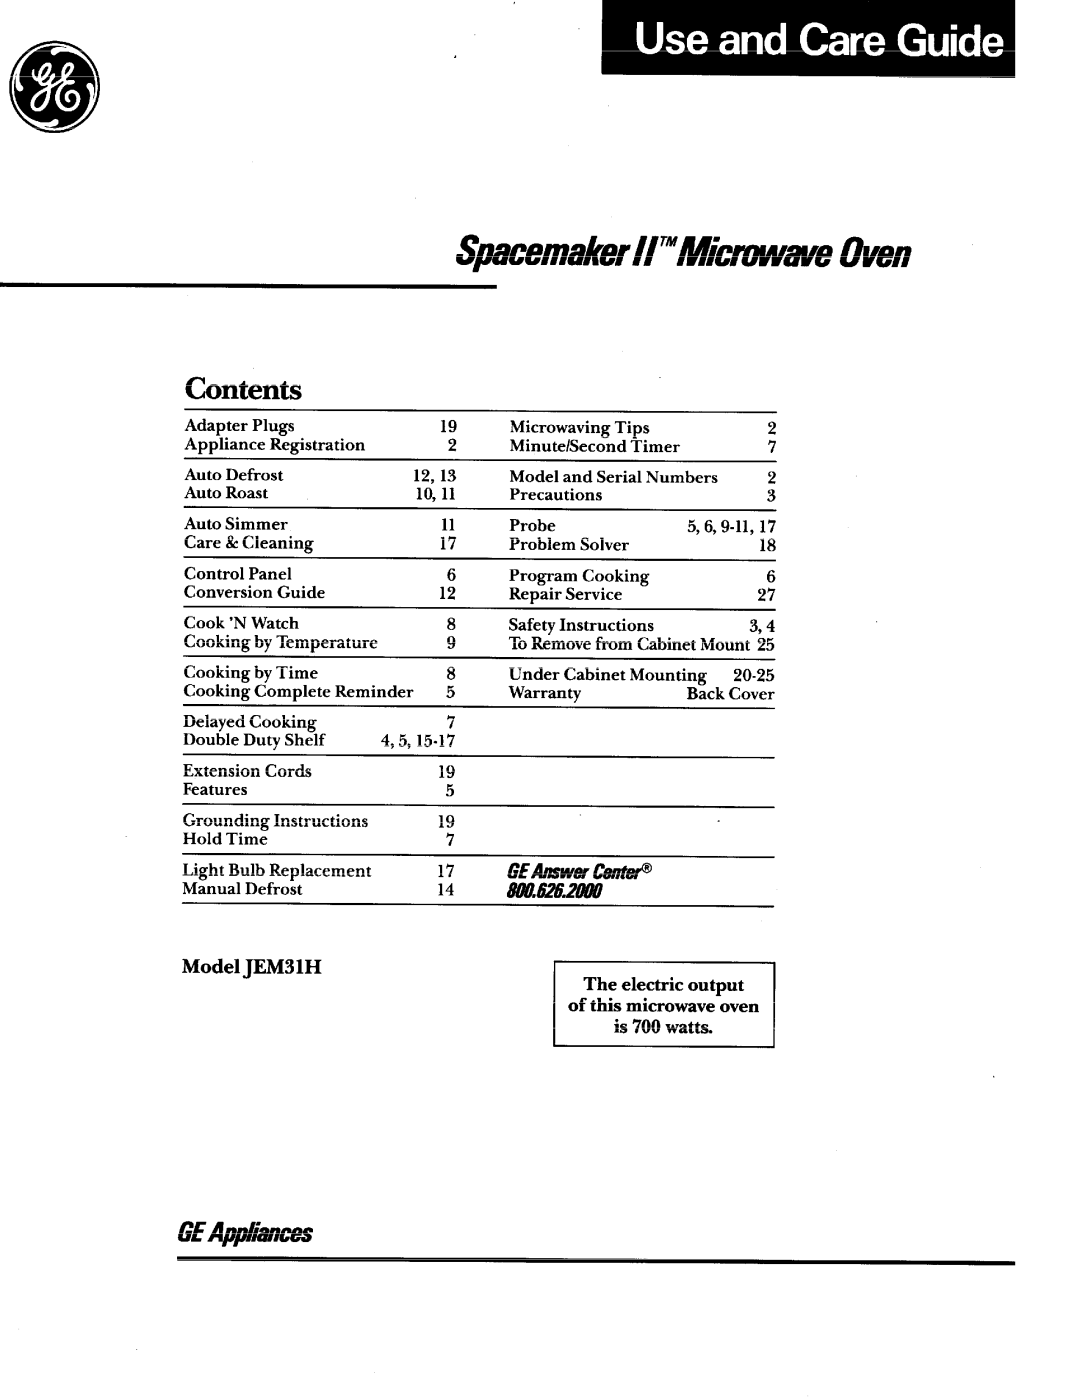 GE JEM31H manual Contents, Spacemakerll’”Micwie Oven, GEAppRmces 